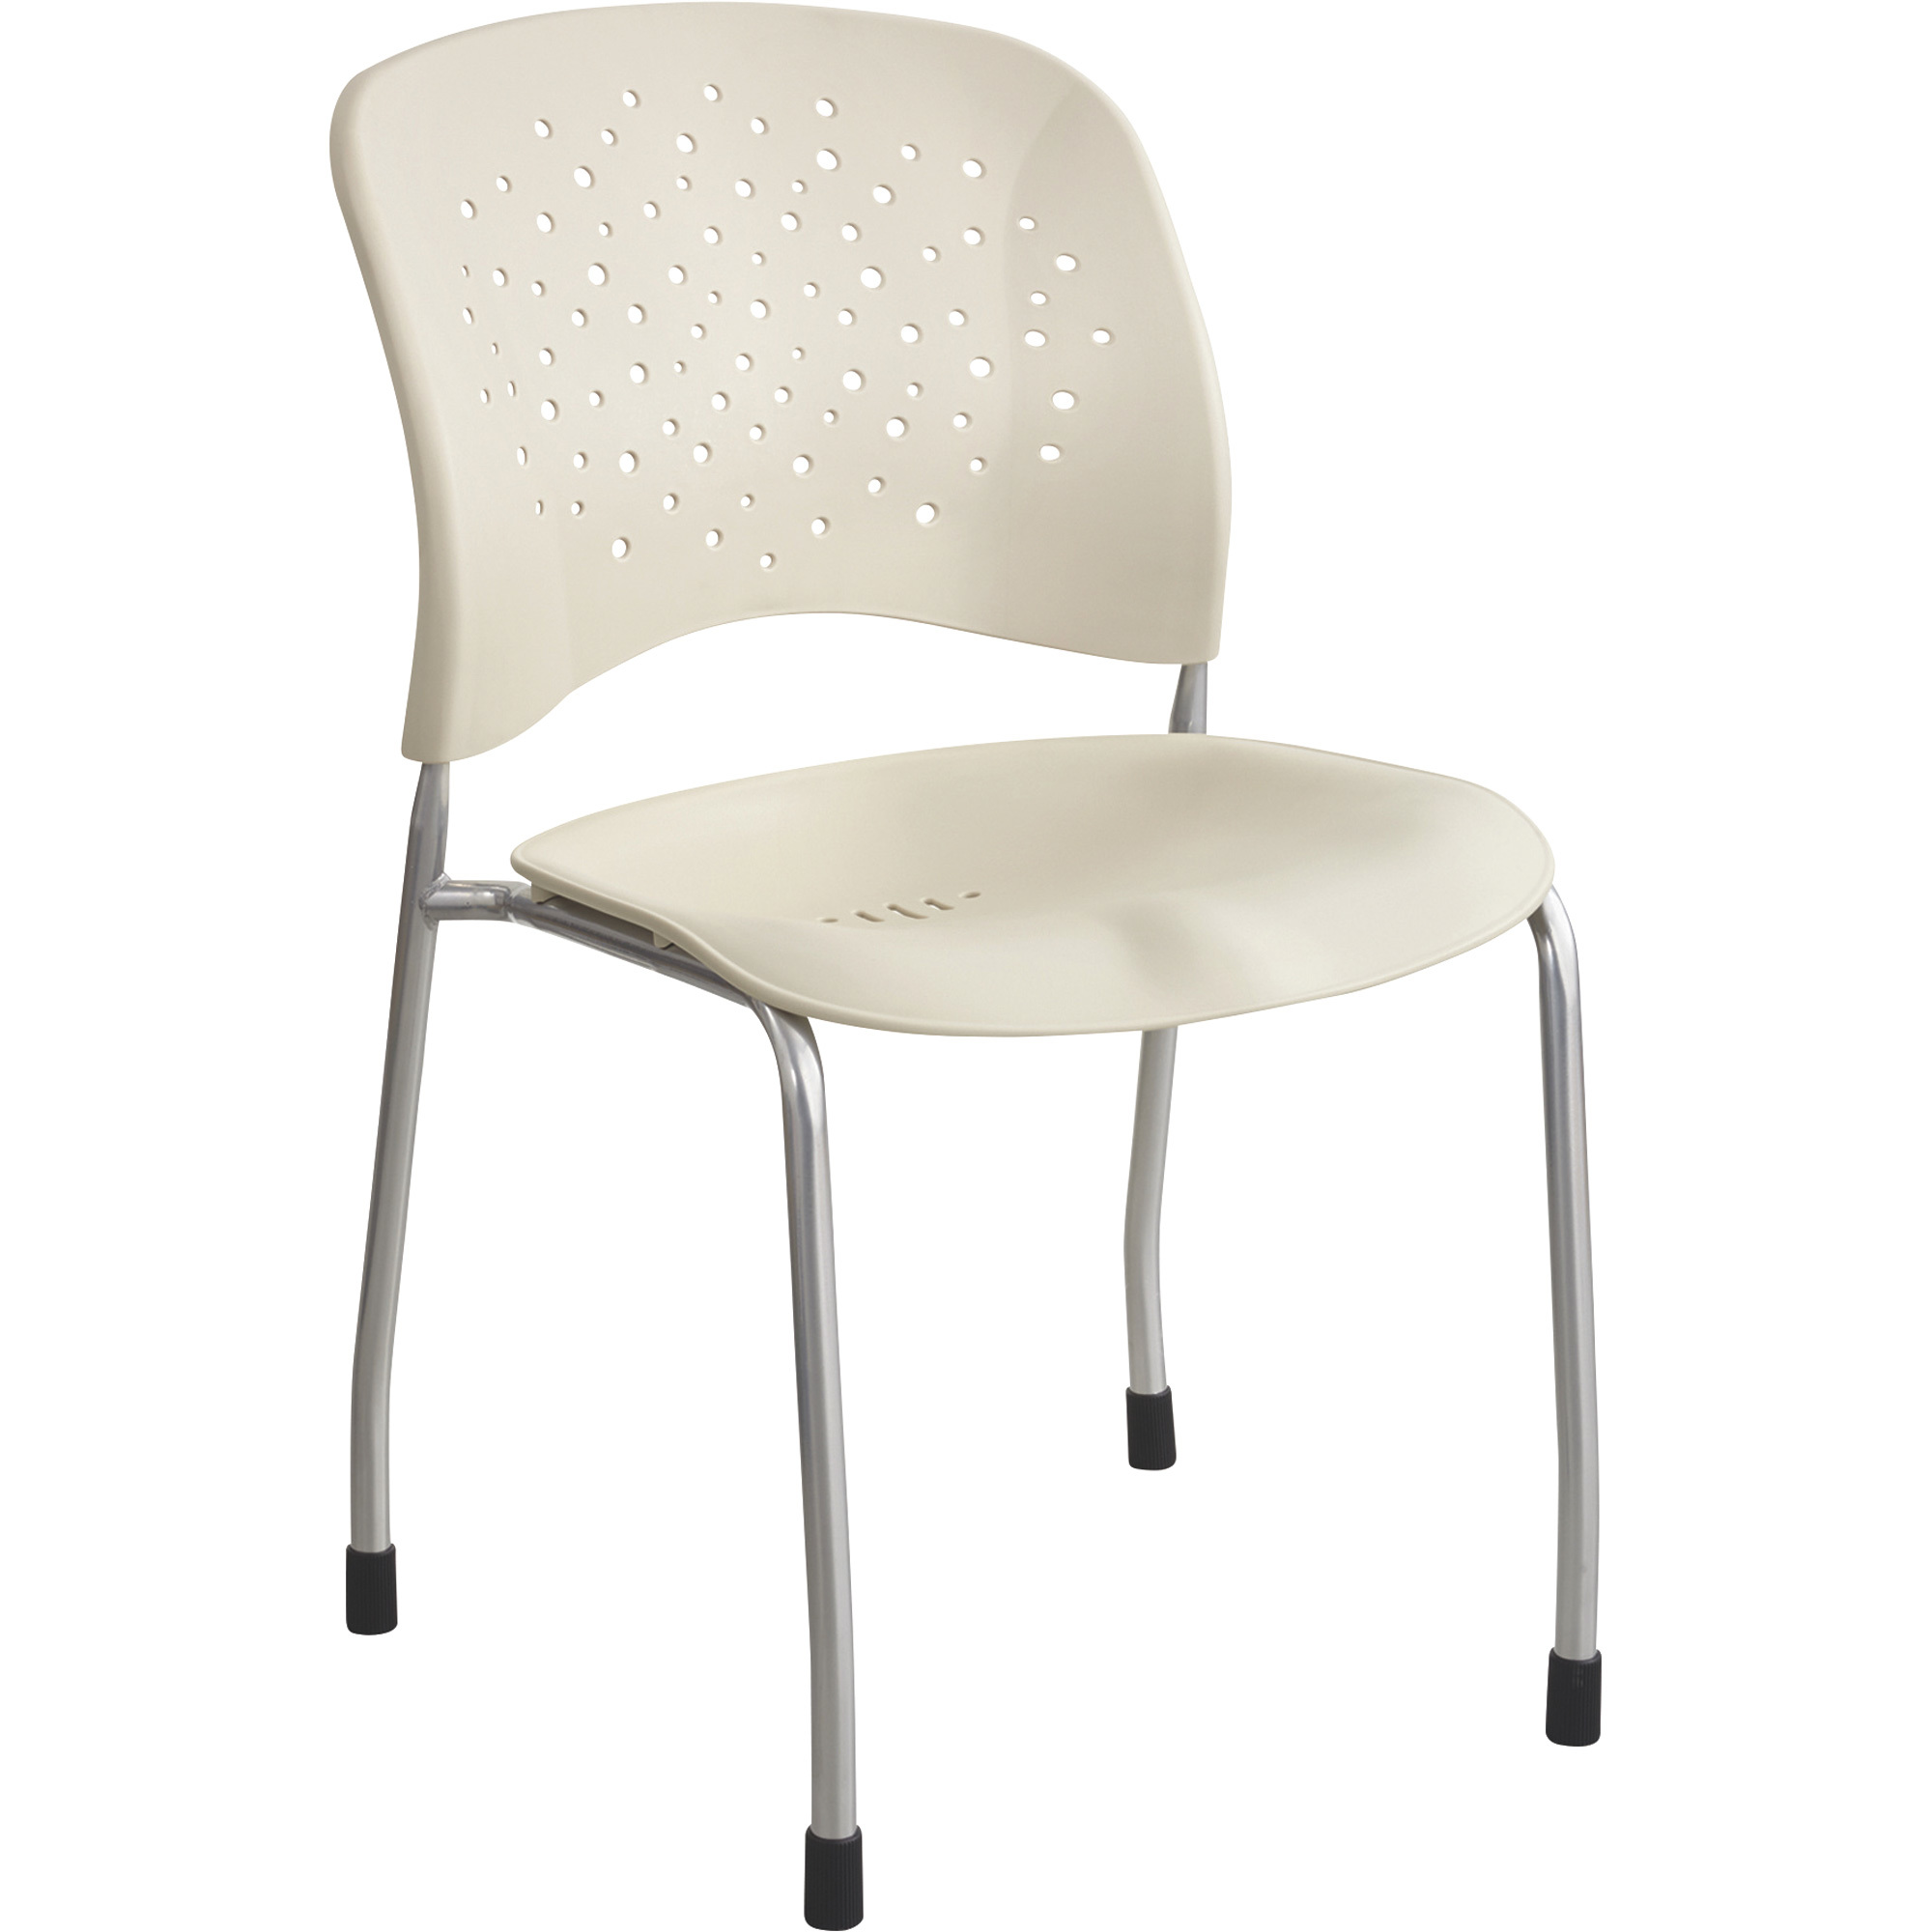 Safco Reve Guest Chairs with Straight Legs and Round Back — Set of 2, Latte, Model 6805LT -  Mayline Safco